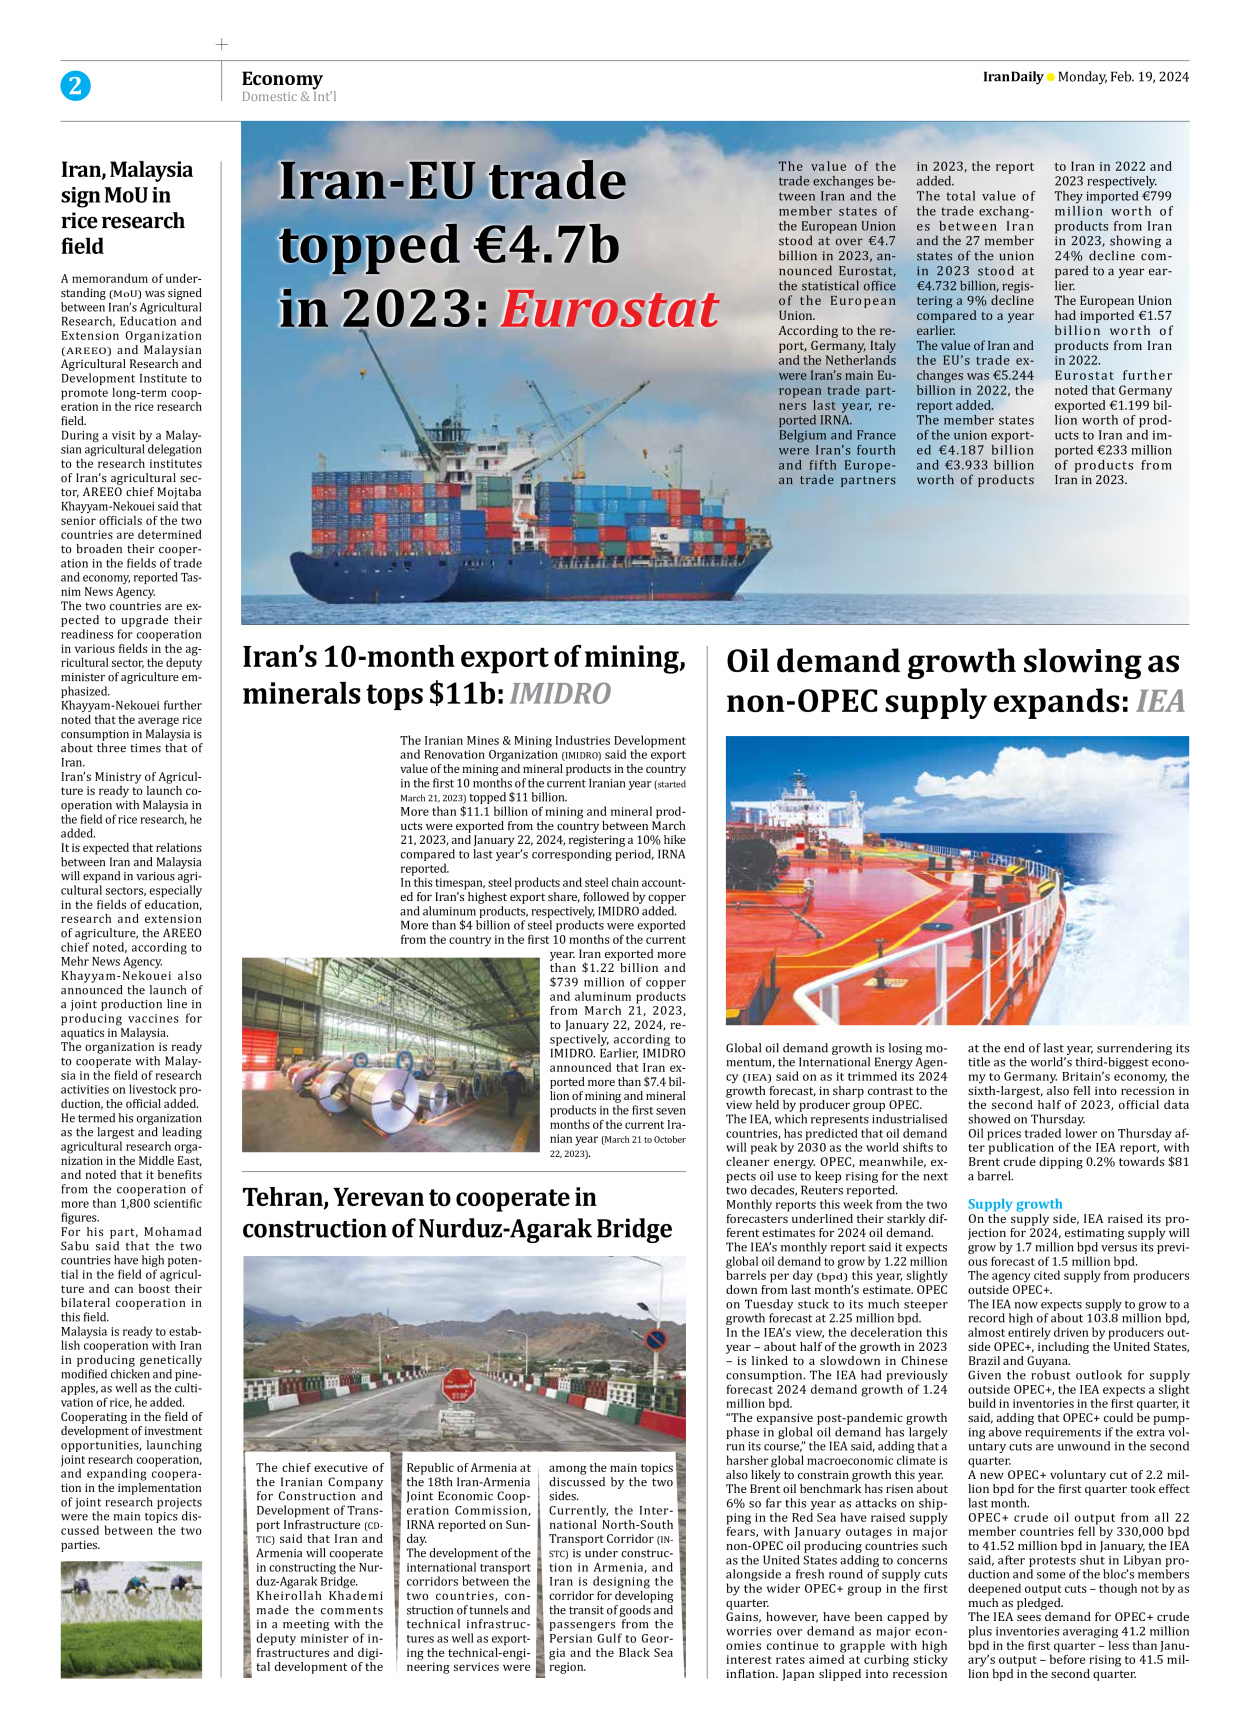 Iran Daily - Number Seven Thousand Five Hundred and Eleven - 19 February 2024 - Page 2